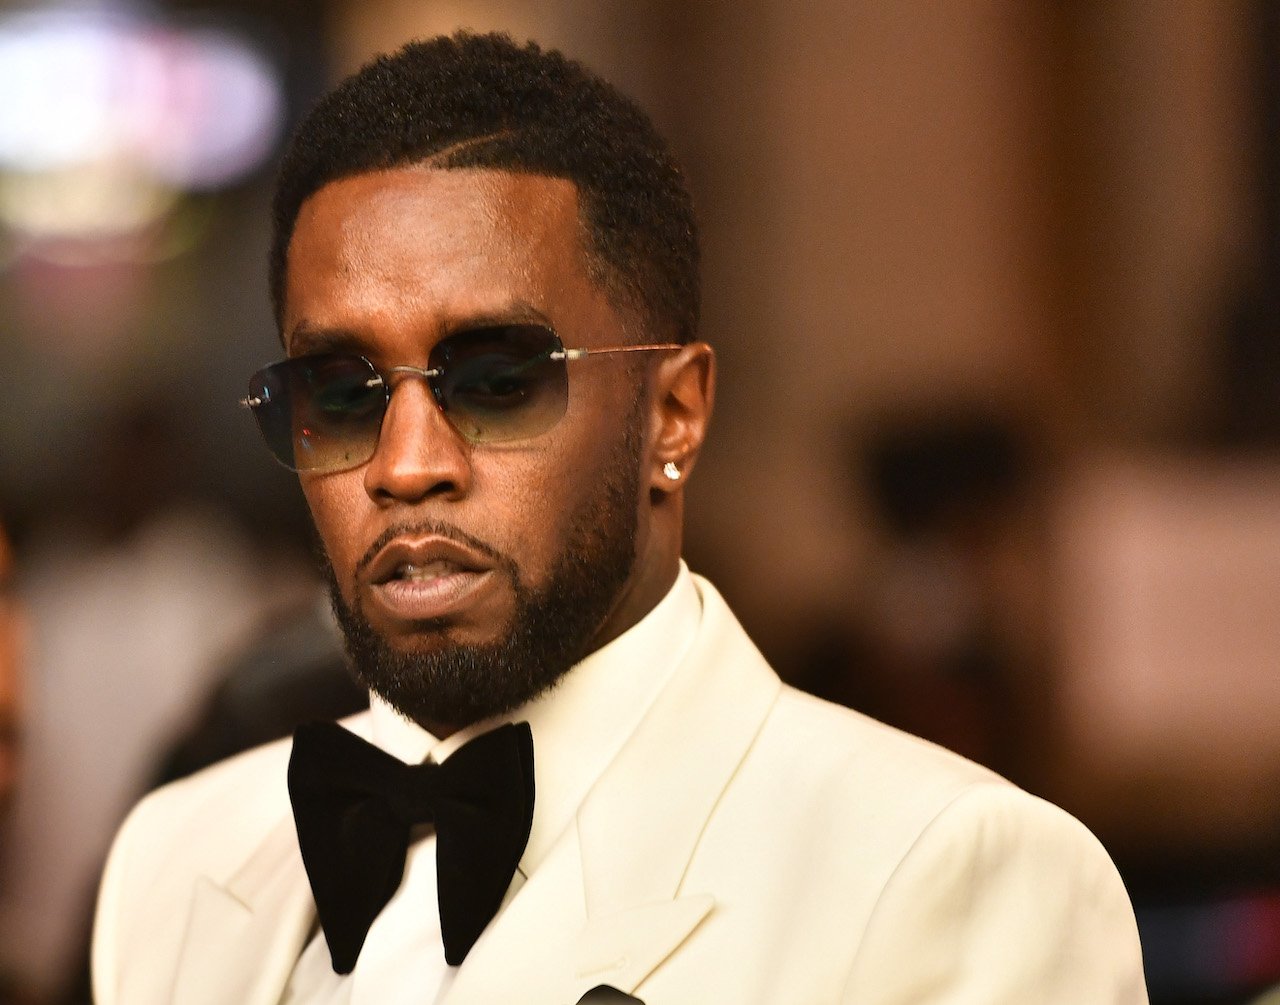 Diddy poses for photo 2021; Diddy recently confirmed a new record label